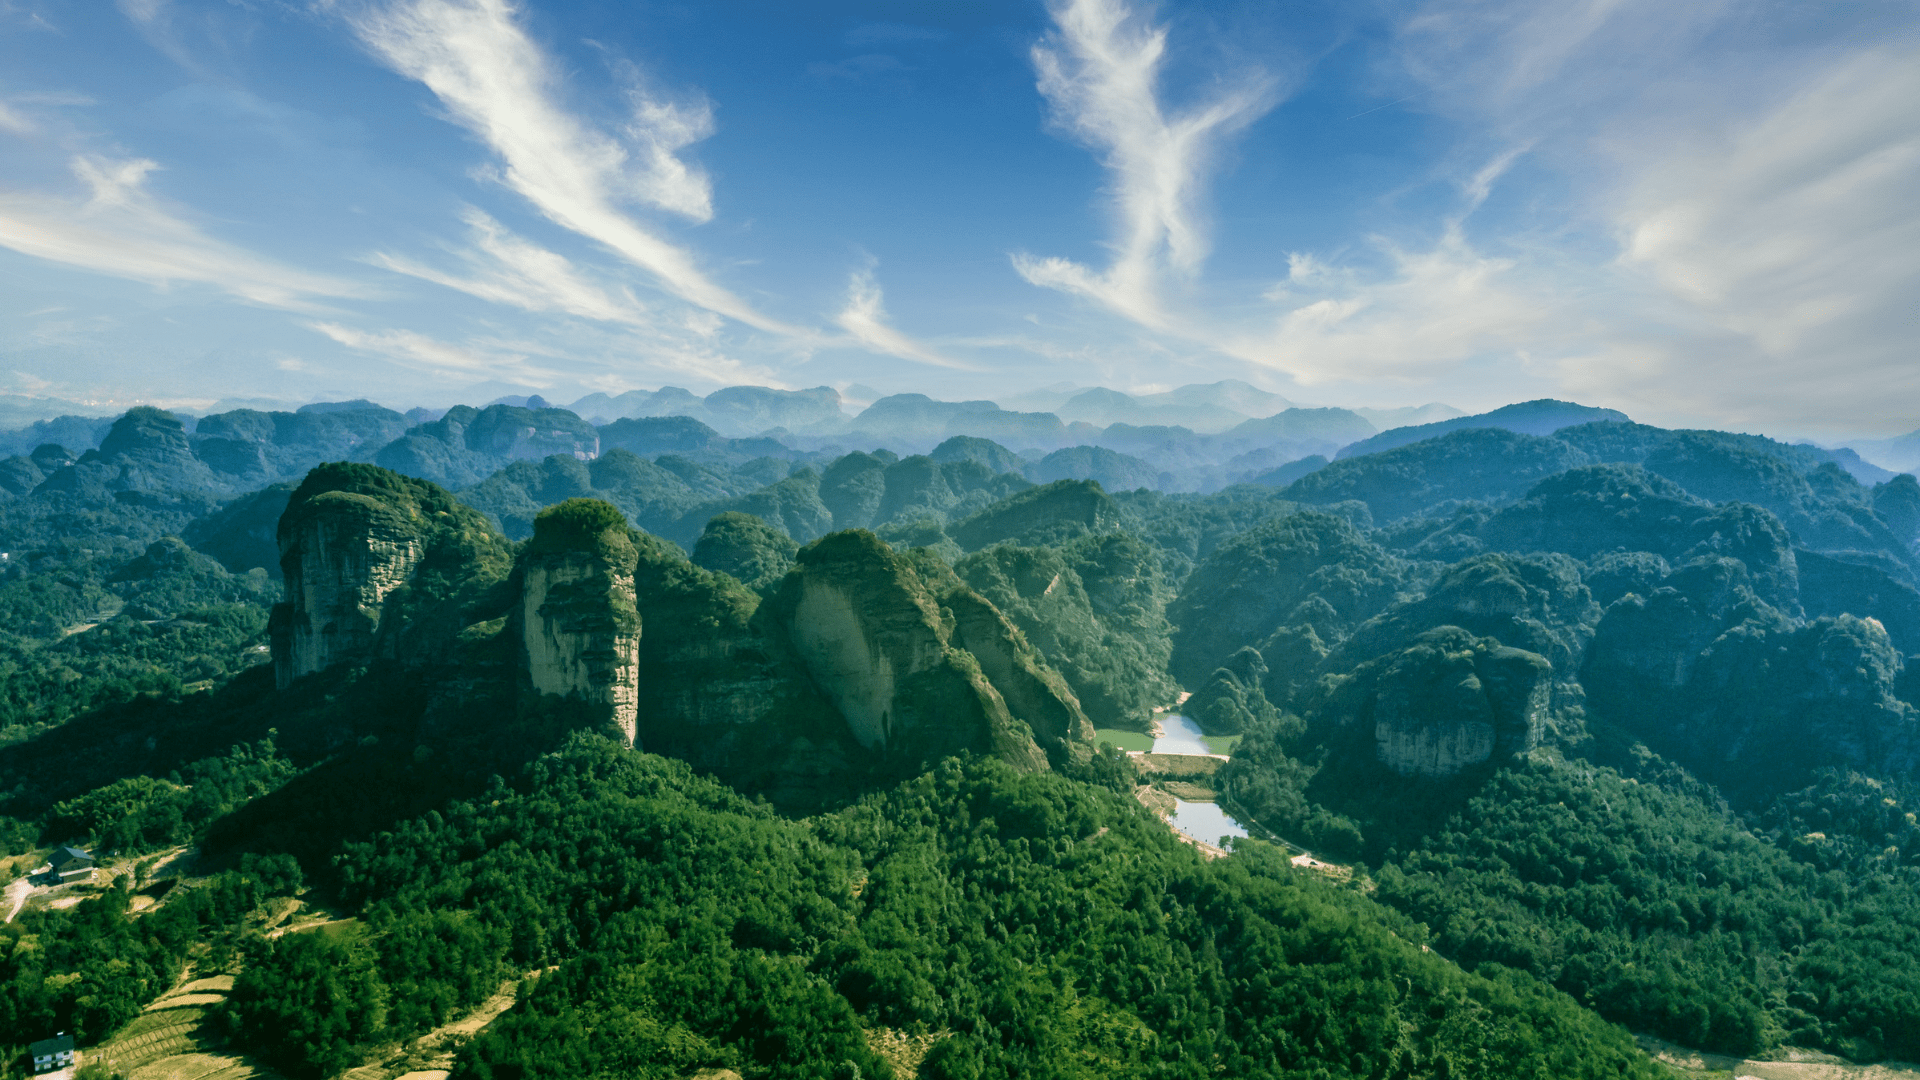 Mount Longhu's peaks symbolize balance and the interplay of yin and yang in Daoism